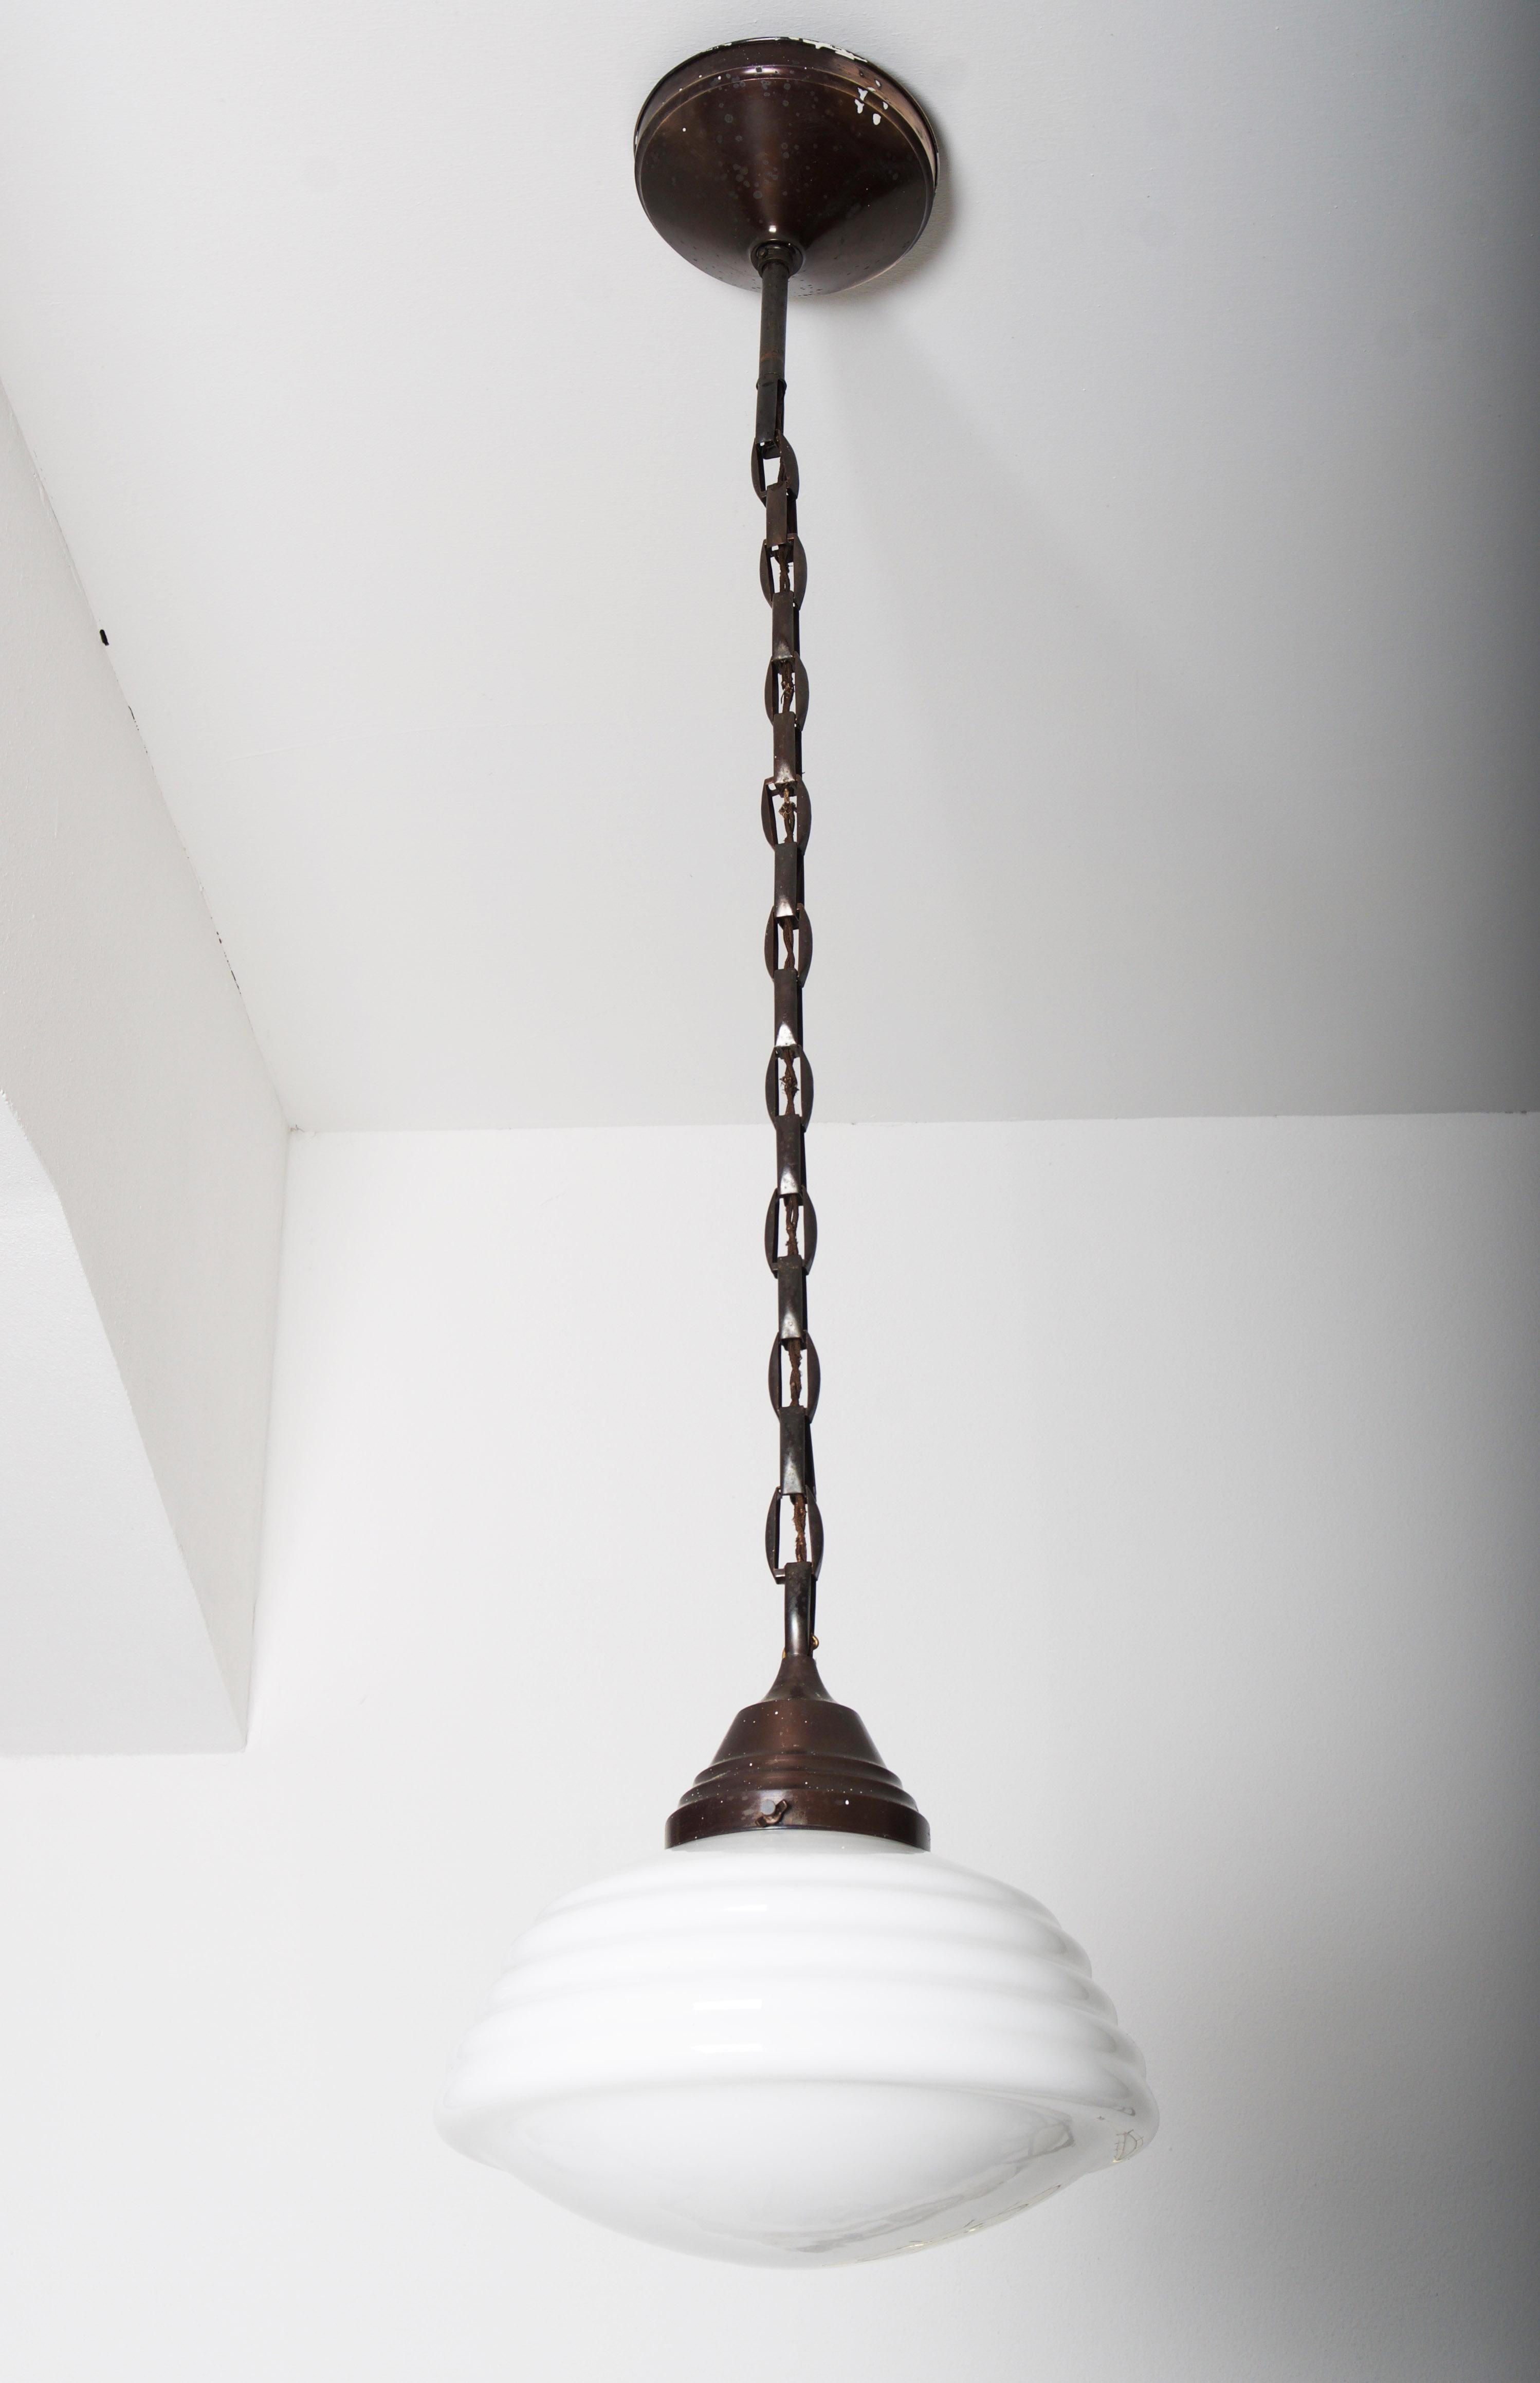 Opaline shade with ridged side made in Denmark in the 1930s.

